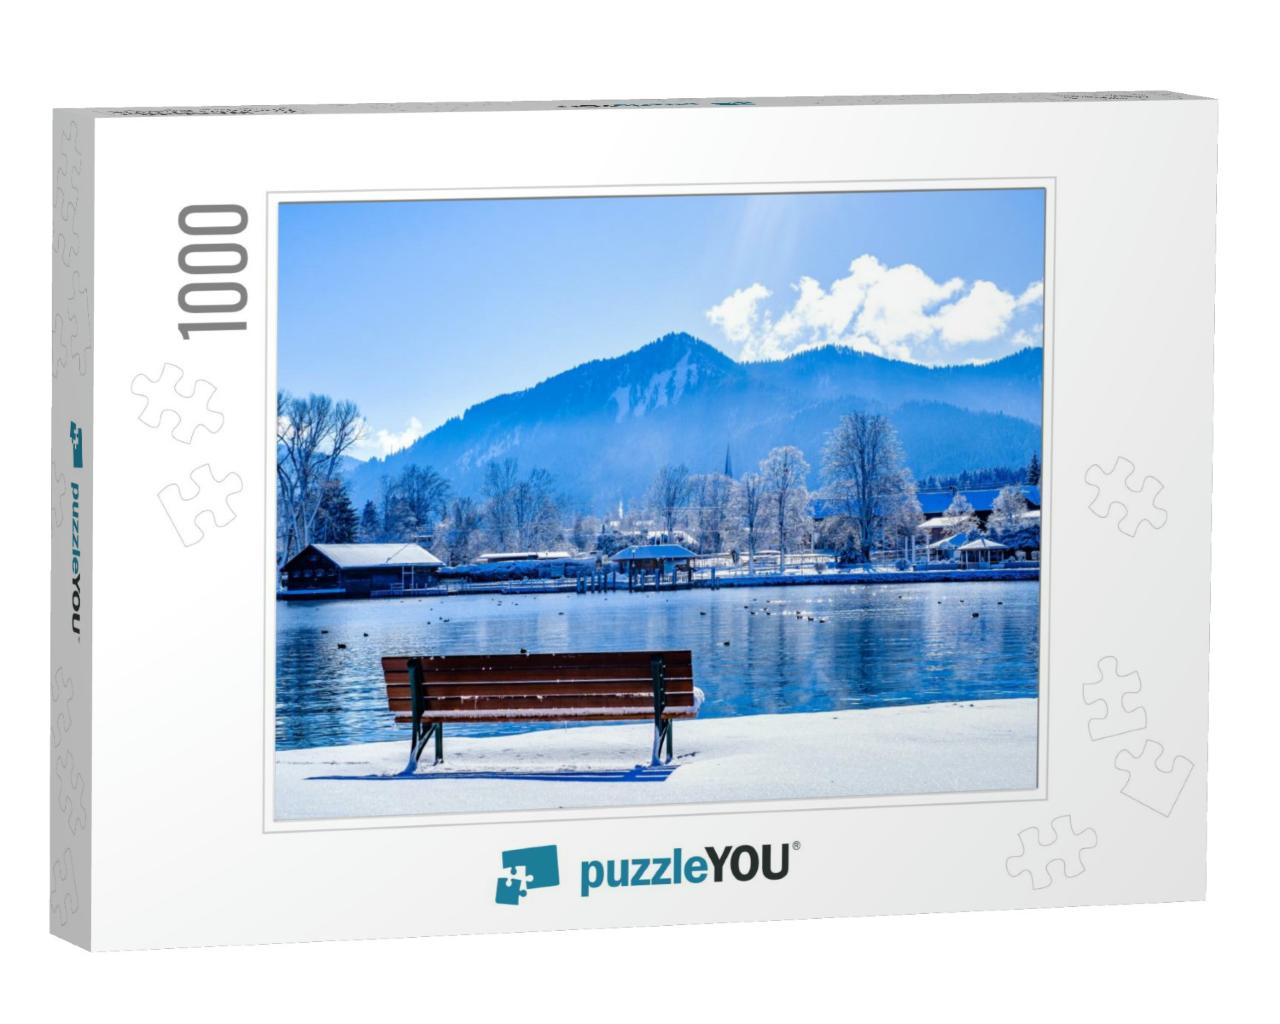 Landscape At the Tegernsee Lake - Bad Wiessee - Bavaria... Jigsaw Puzzle with 1000 pieces